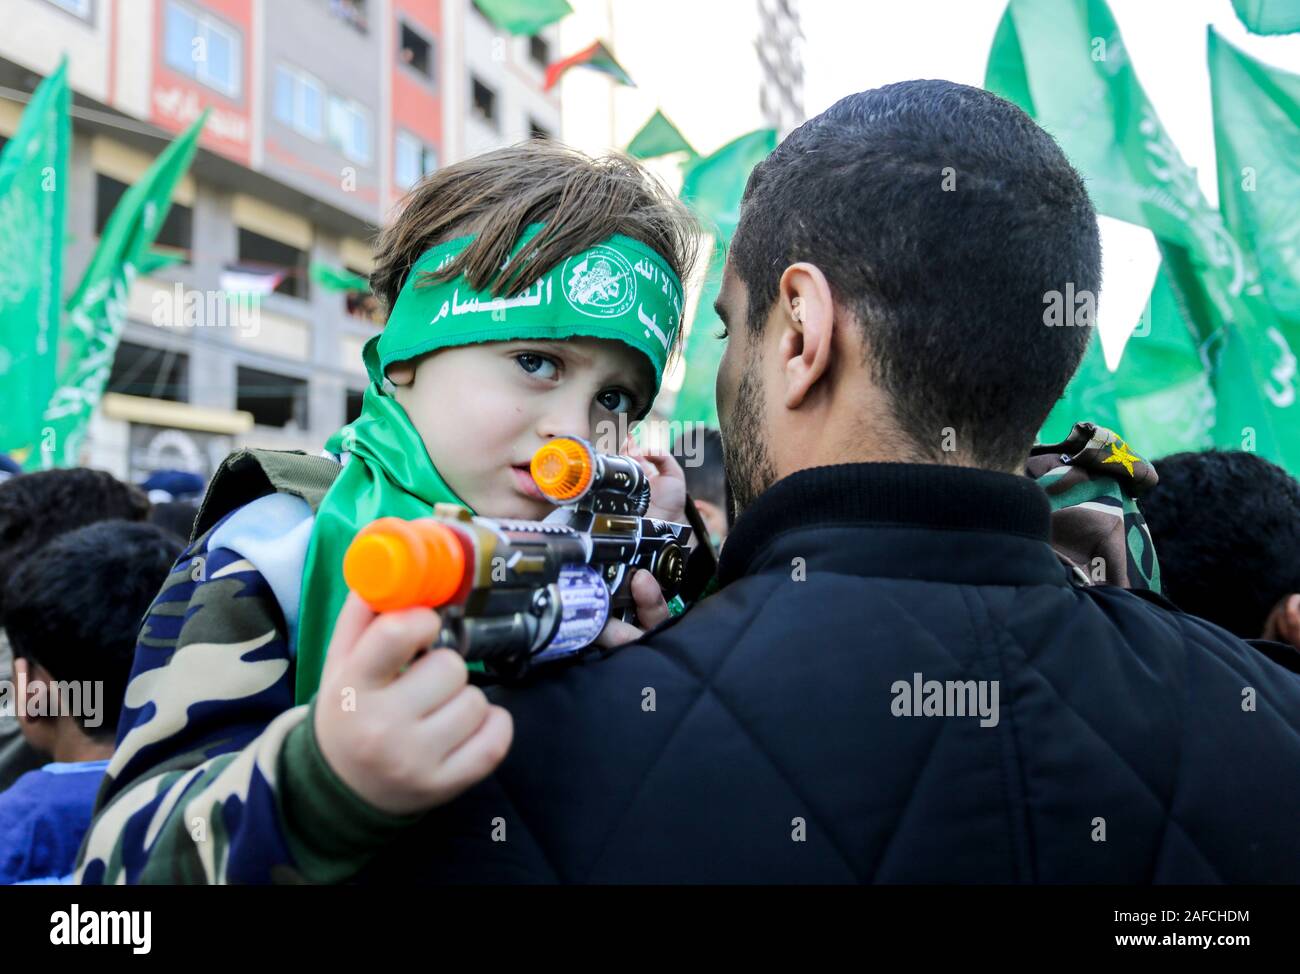 Palestinian Hamas kid supporter with a toy gun during a rally marking the 32nd anniversary of the founding of the Islamist movement Hamas. Stock Photo